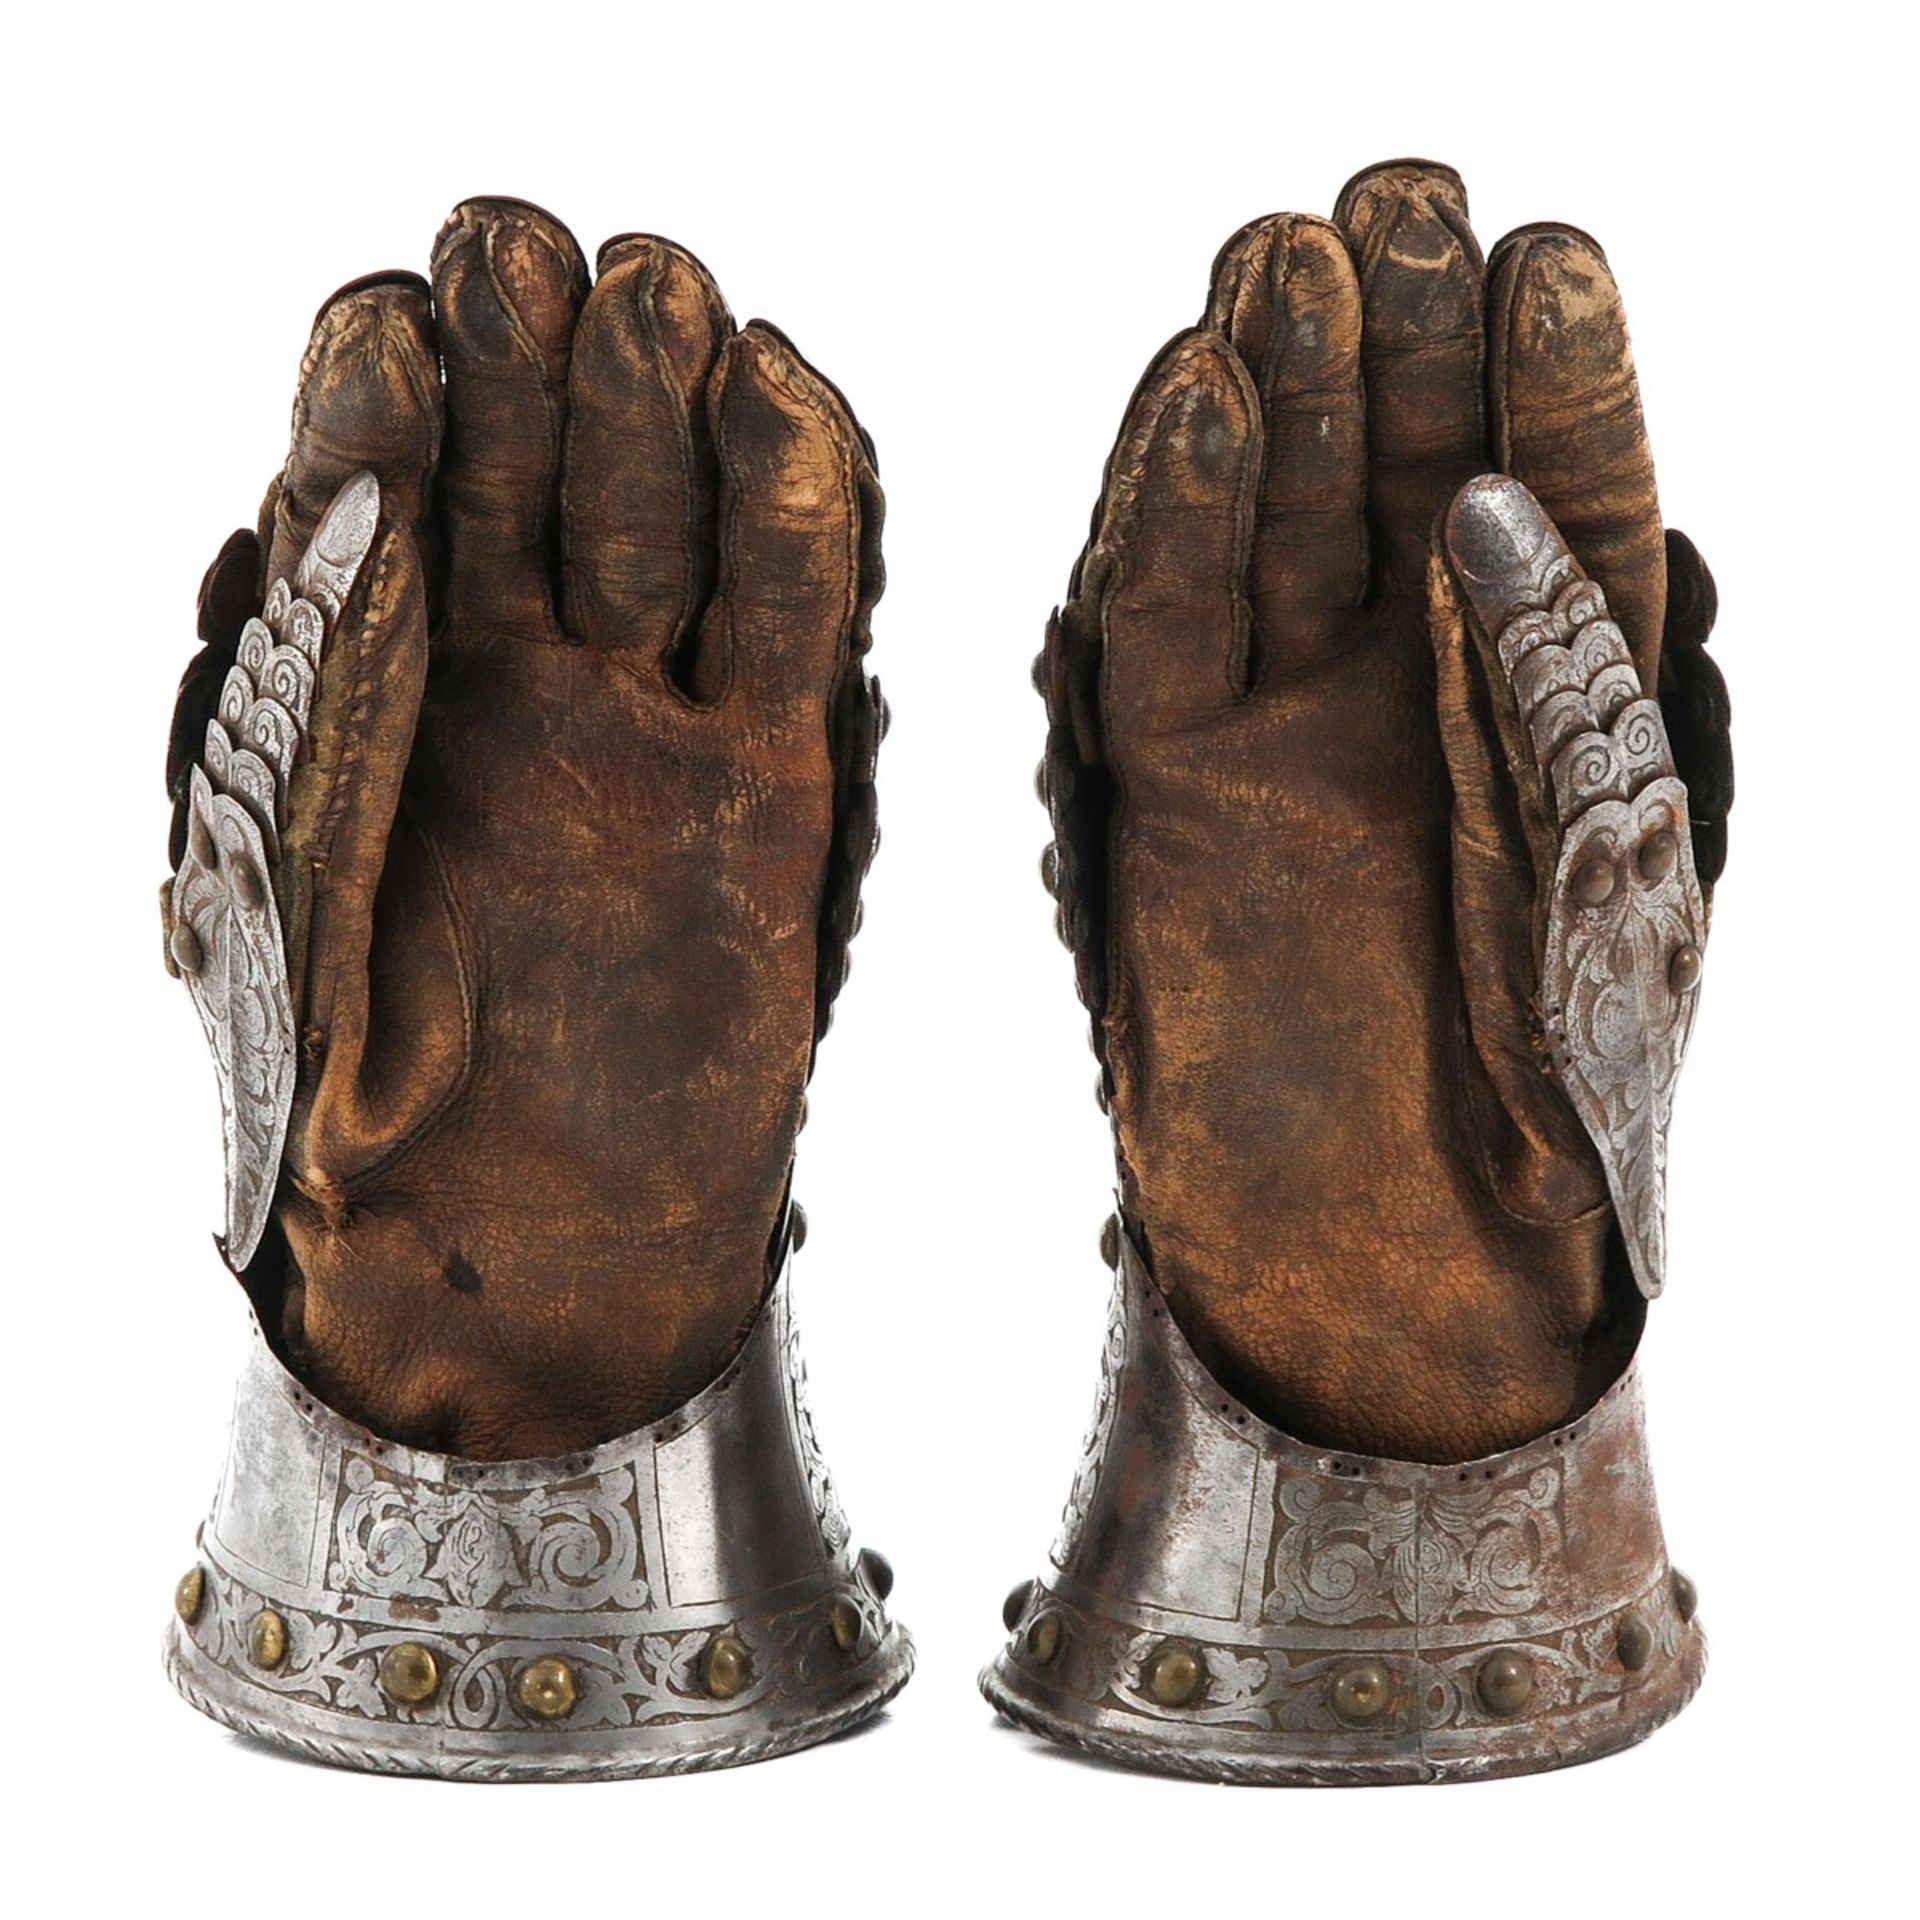 A Pair of Knights Gloves - Image 4 of 10